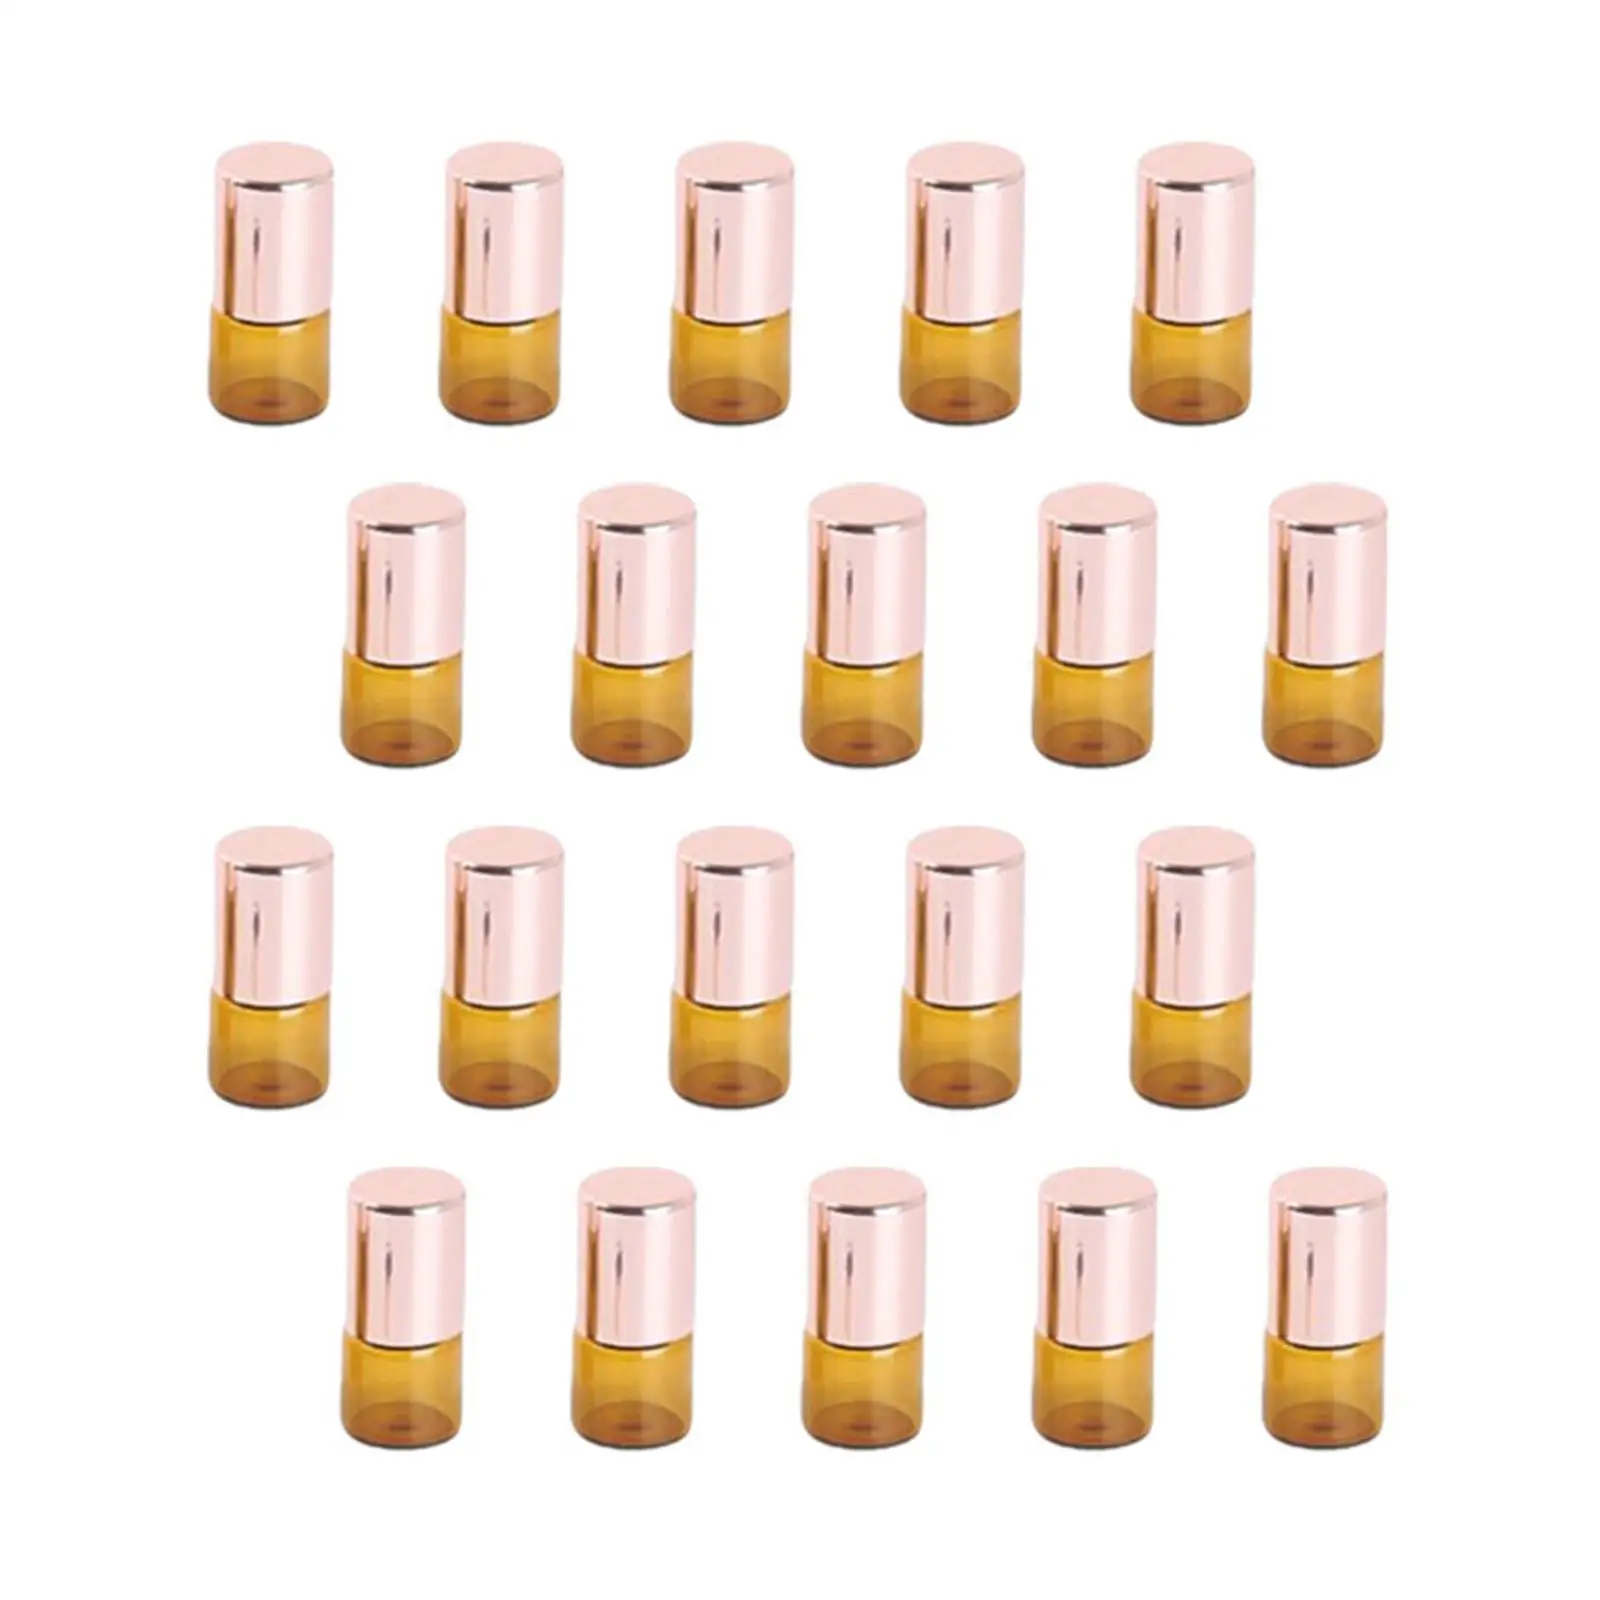 20Pcs Refillable Amber Glass Roll On Bottles Holder for Cosmetic Makeup Sample Smooth Rolling Metal Ball Accessory Lightweight